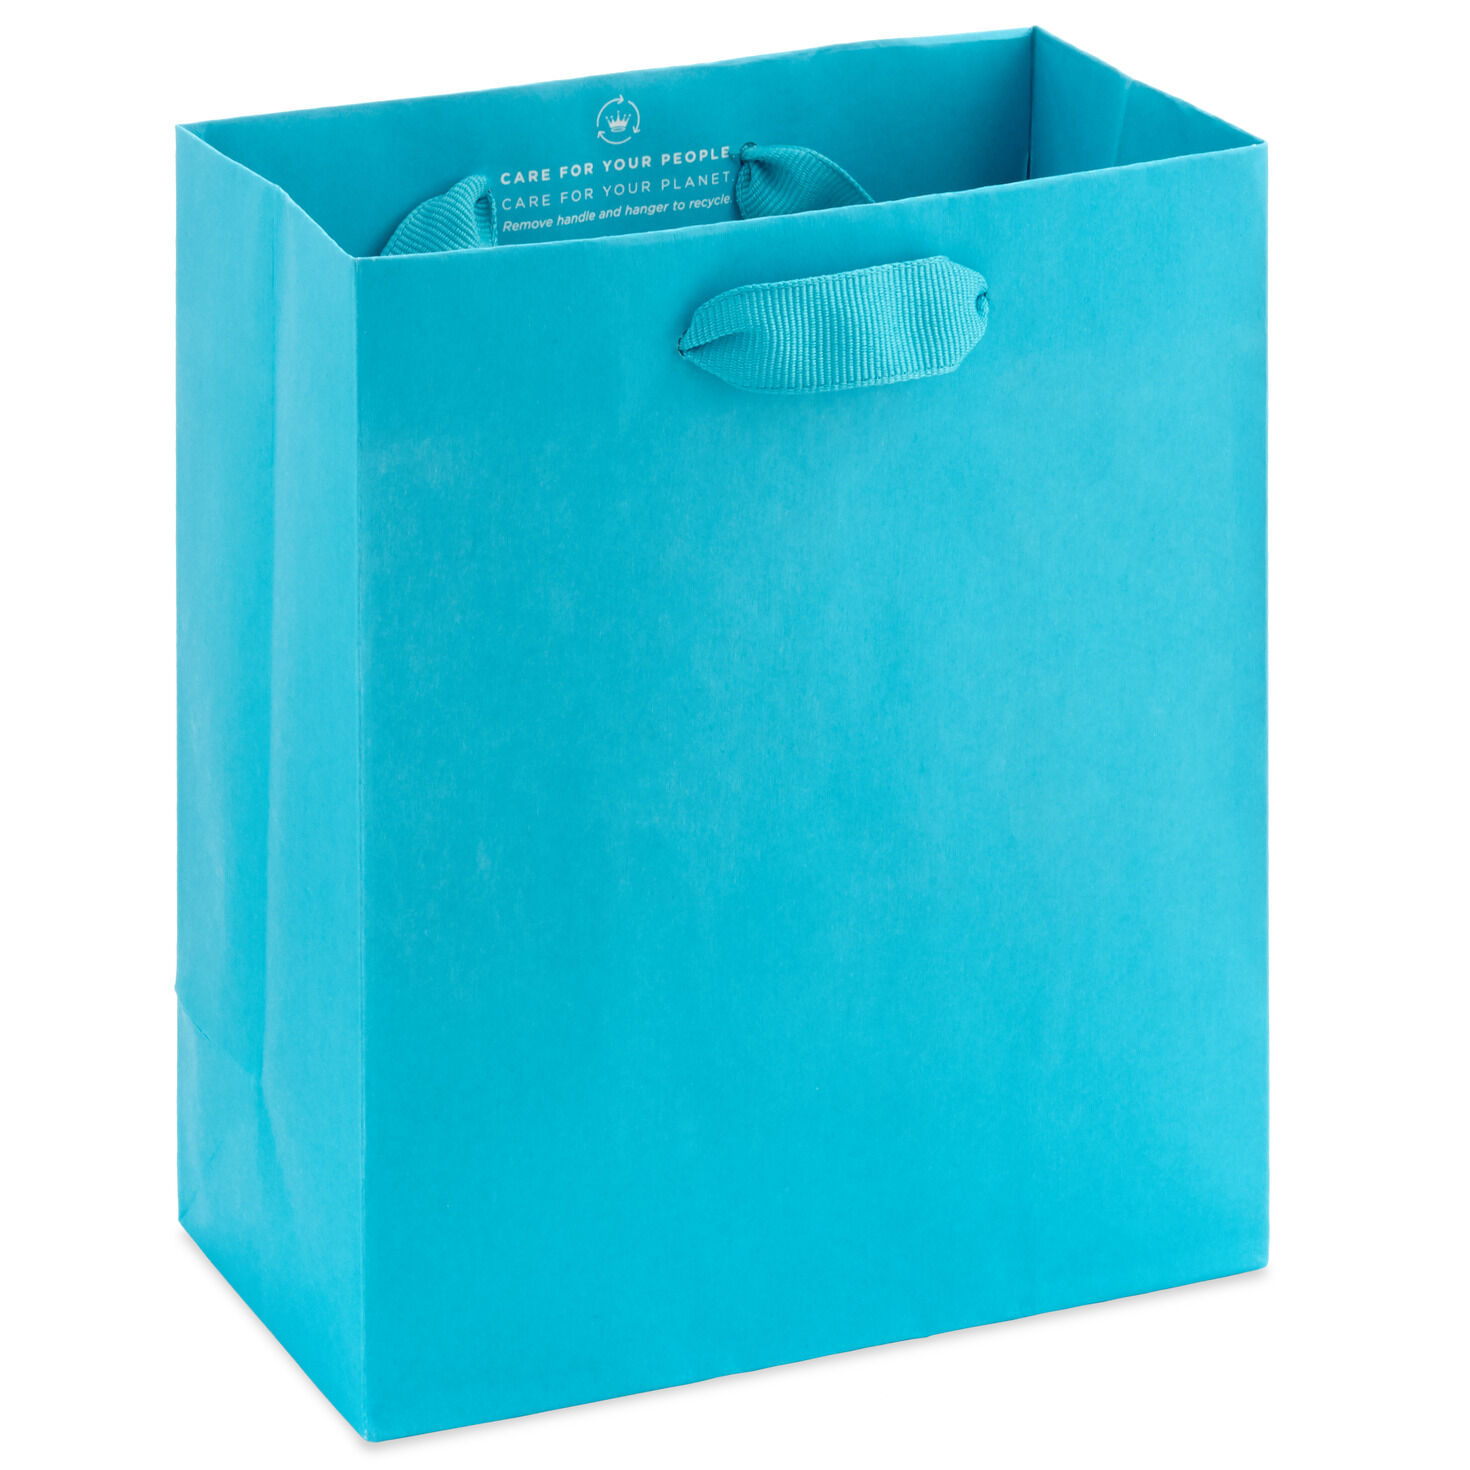 Lot of 20 Teal Turquoise Blue Tote Jewelry Display Gift Bags ~ 4"x4.5"x2.75" 